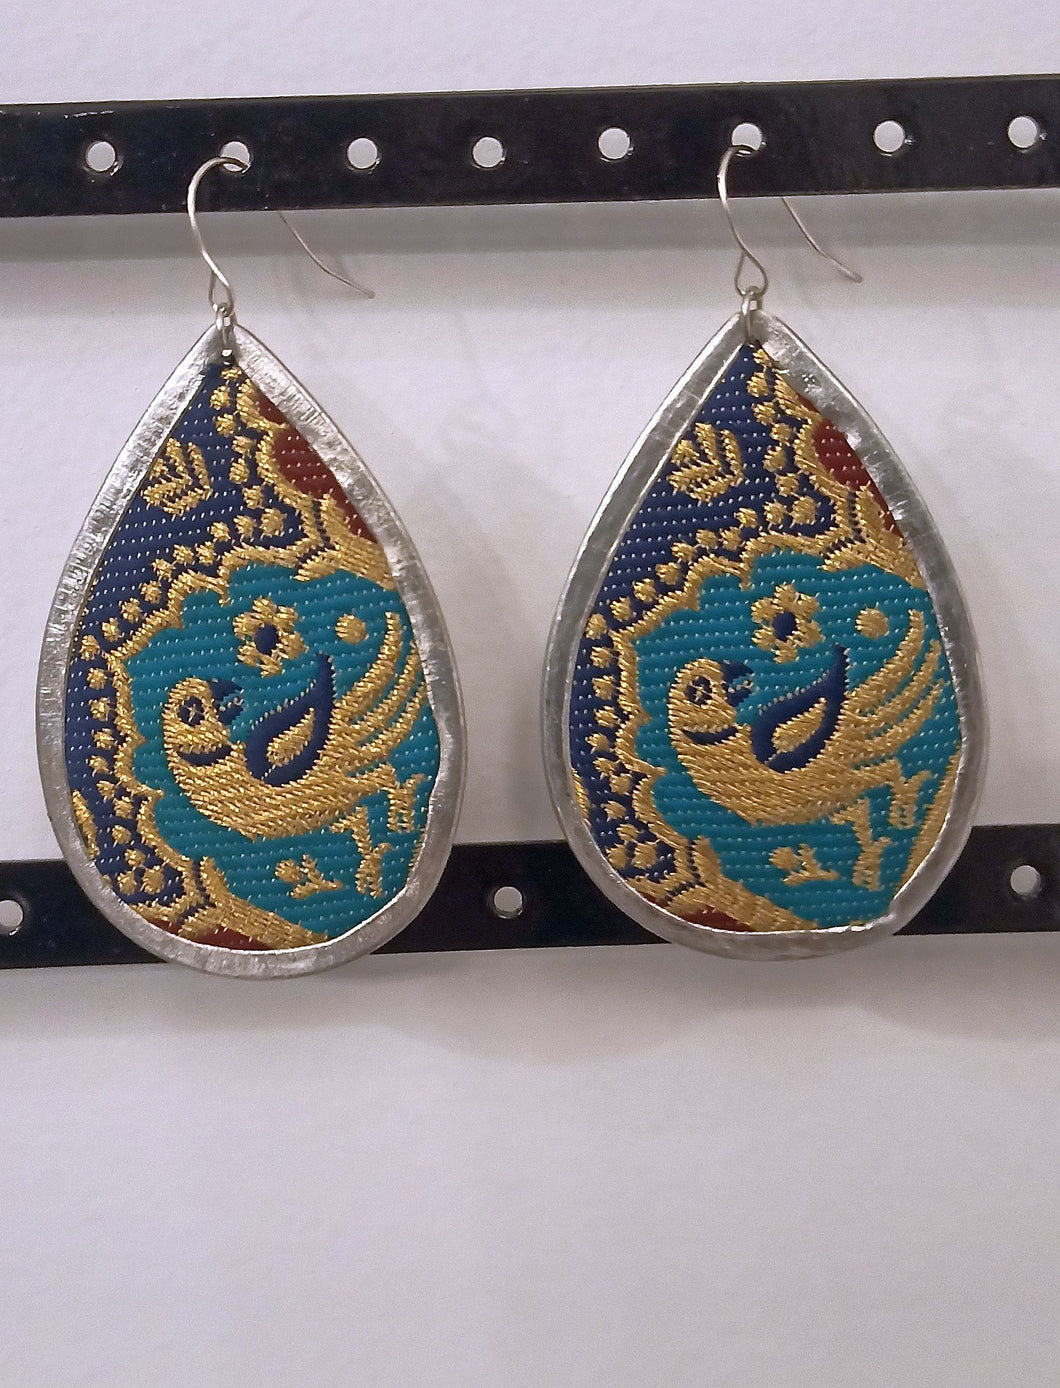 Green Bird earrings : cloth and metal embroidered jewellery hand made in India